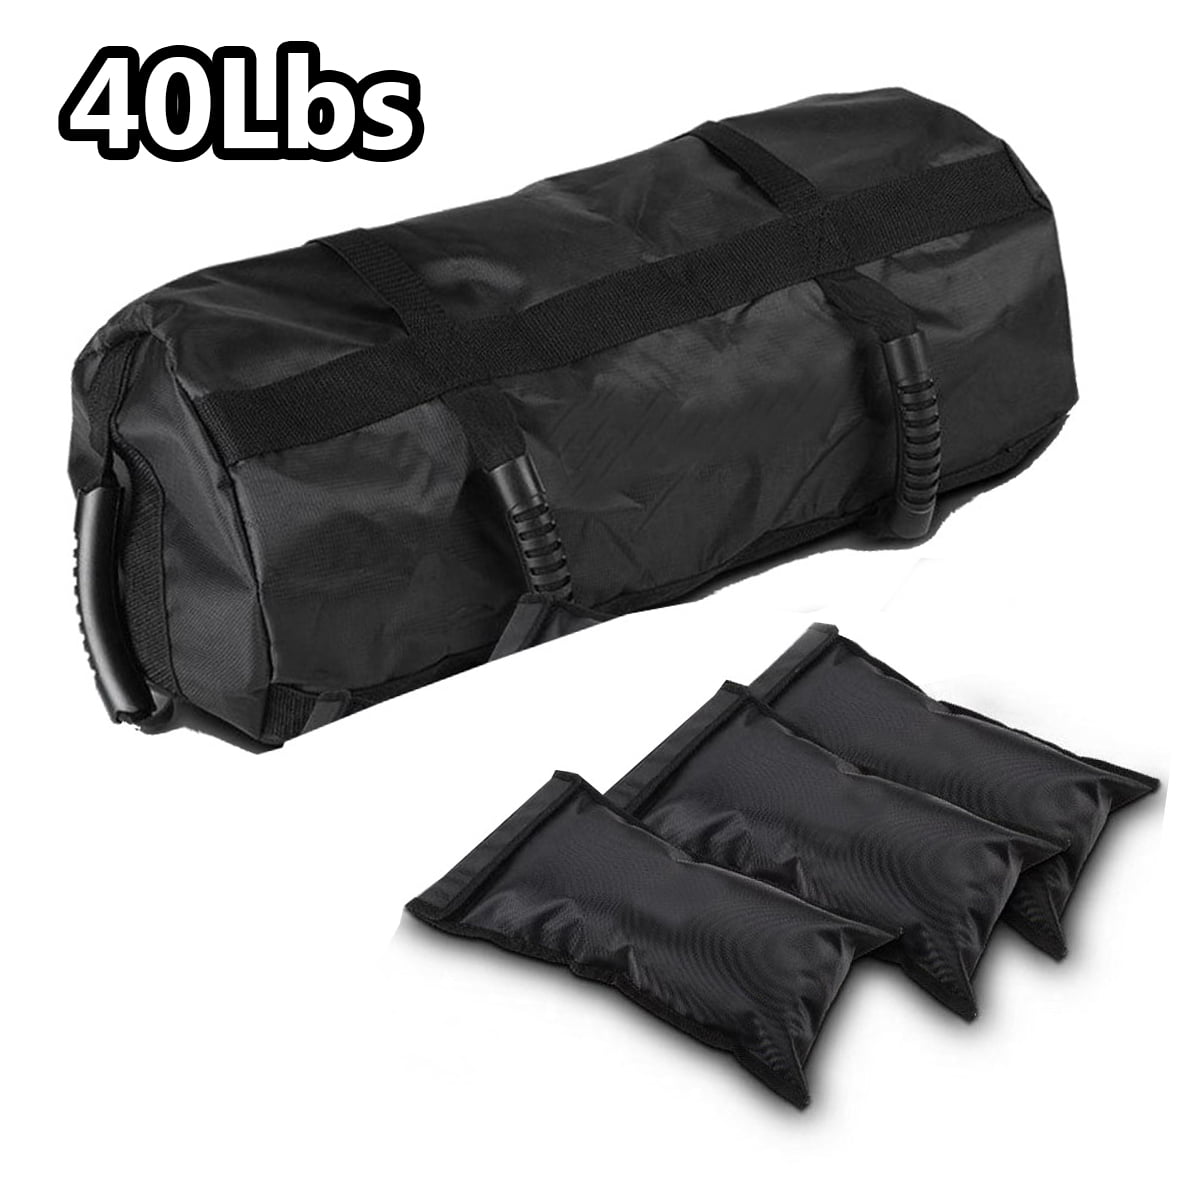 Heavy Duty Sandbag - Workout Bag with Handles for Weight Training - for  Weighted Exercise, Home Fitness and More - Gym Accessories for Men and Women  - Yahoo Shopping